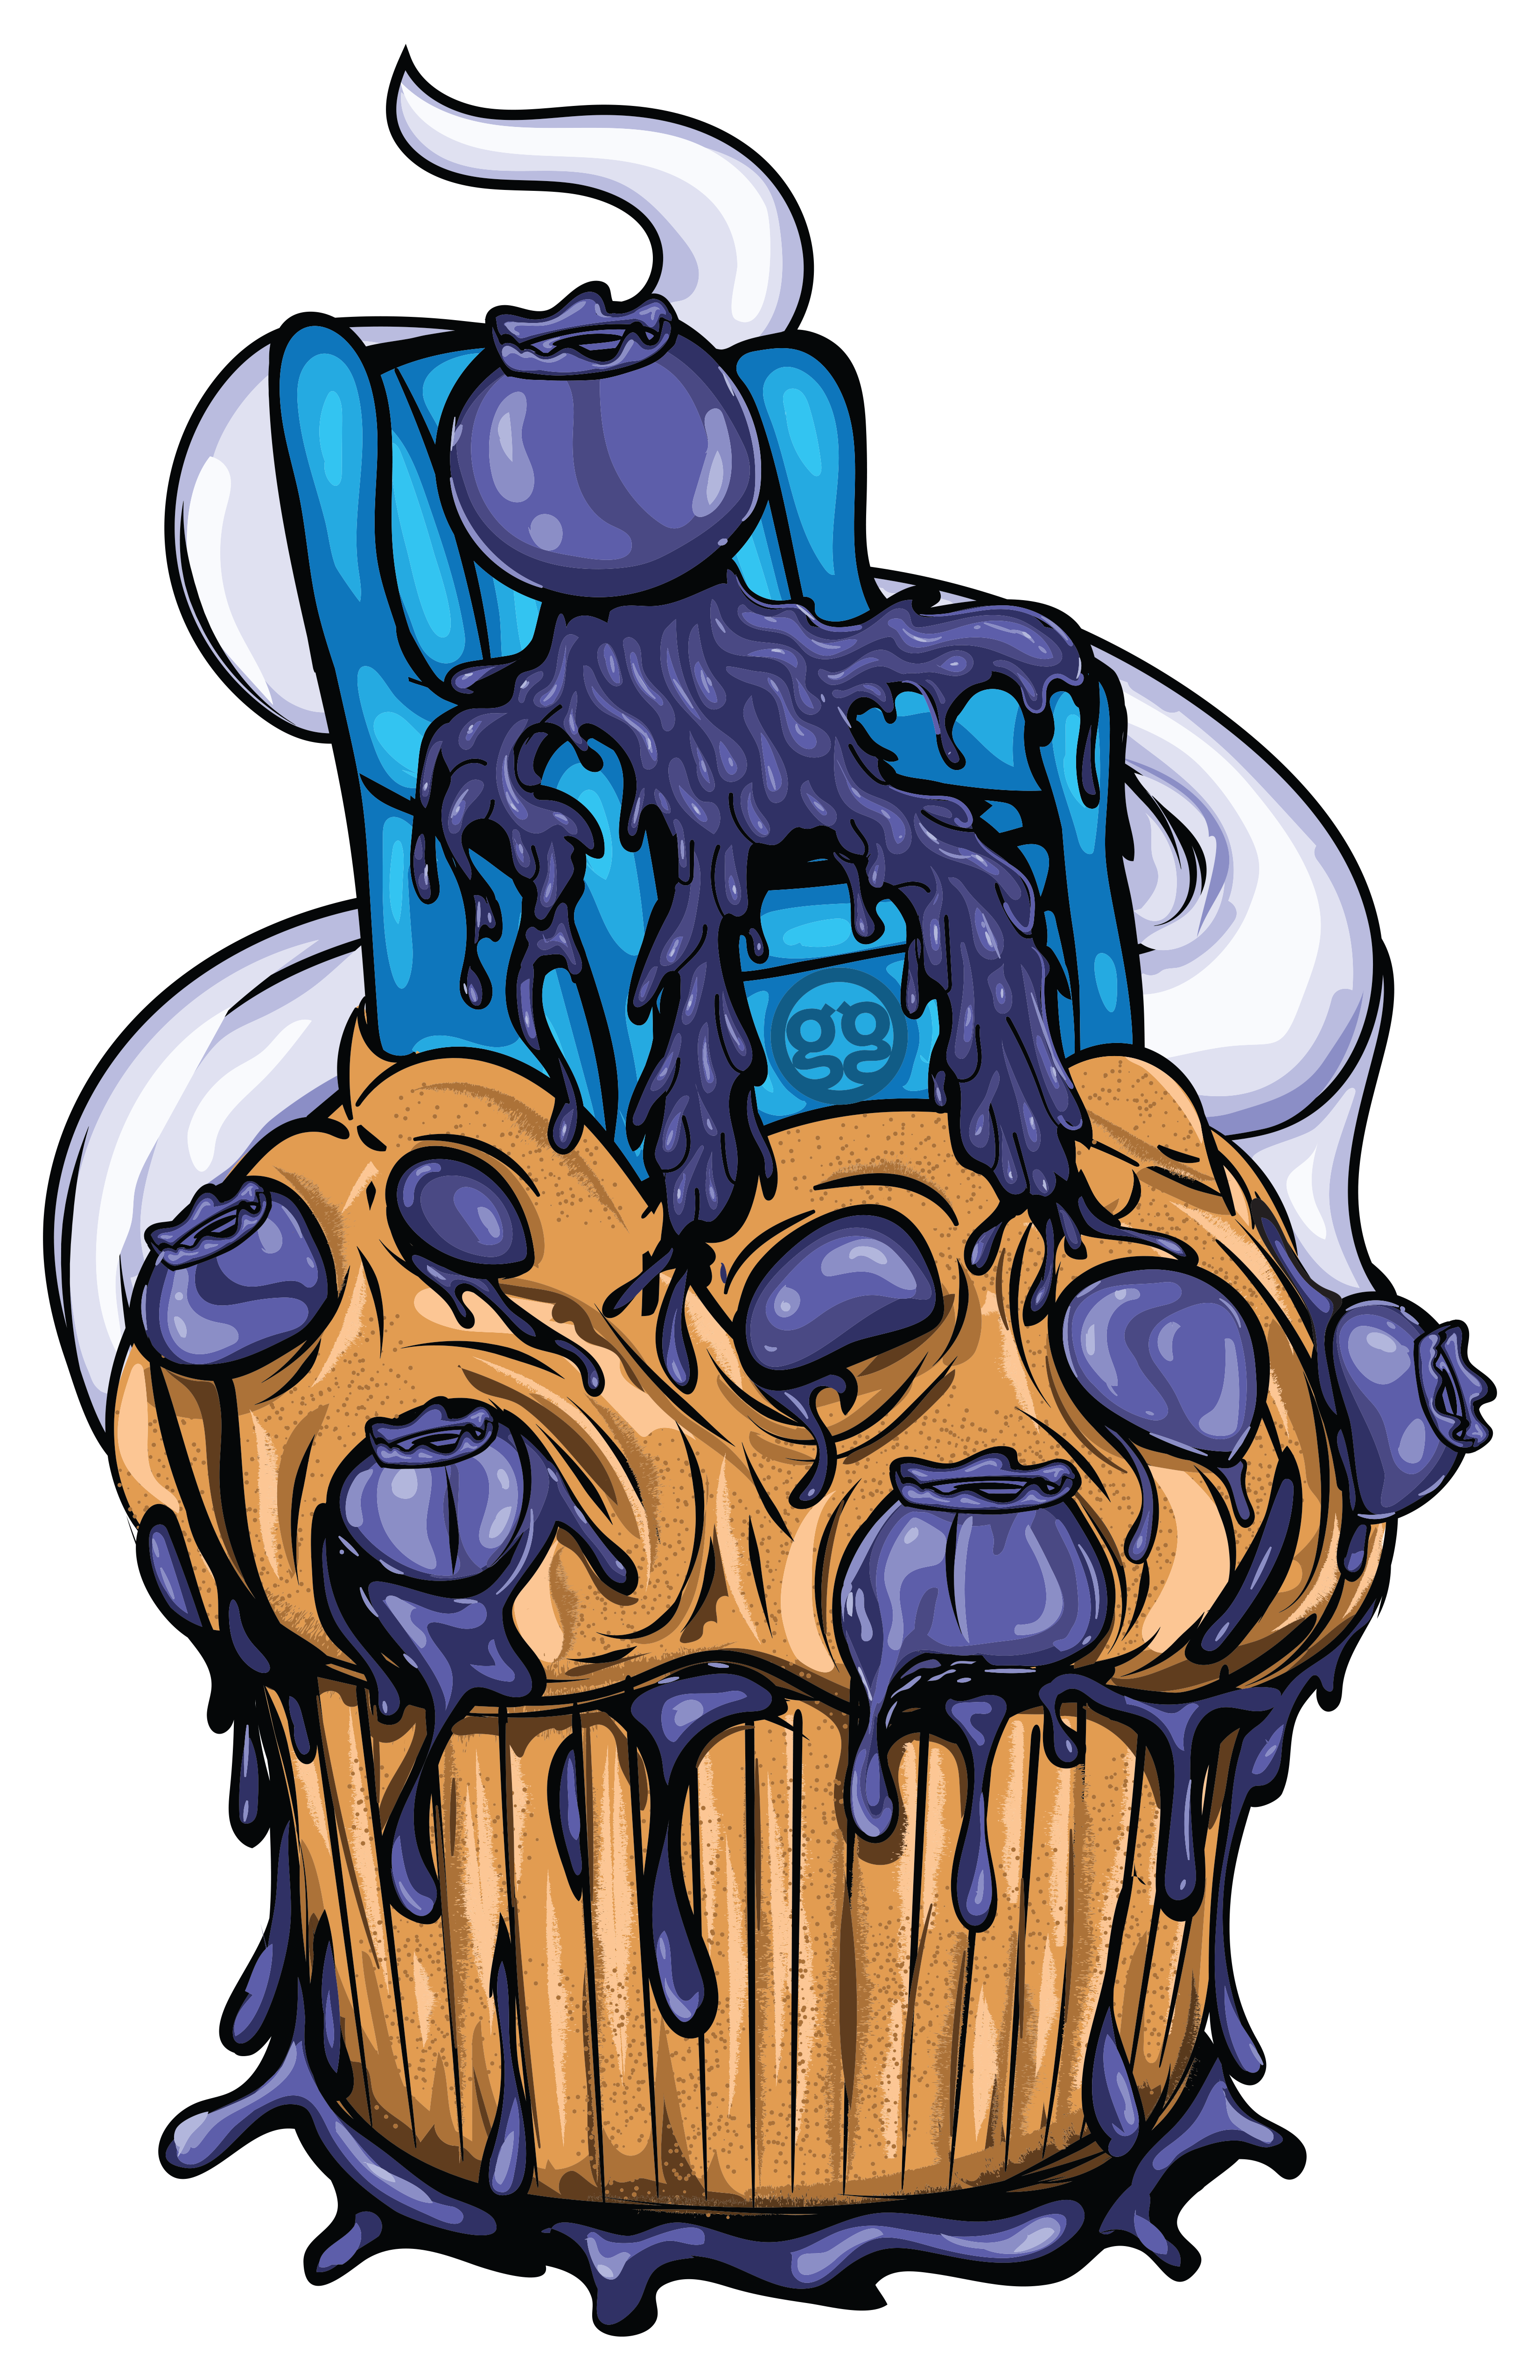 https://groovesolventless.com/wp-content/uploads/2022/10/Individual-Strain-Page_Cutout-Blueberry-Muffin.png